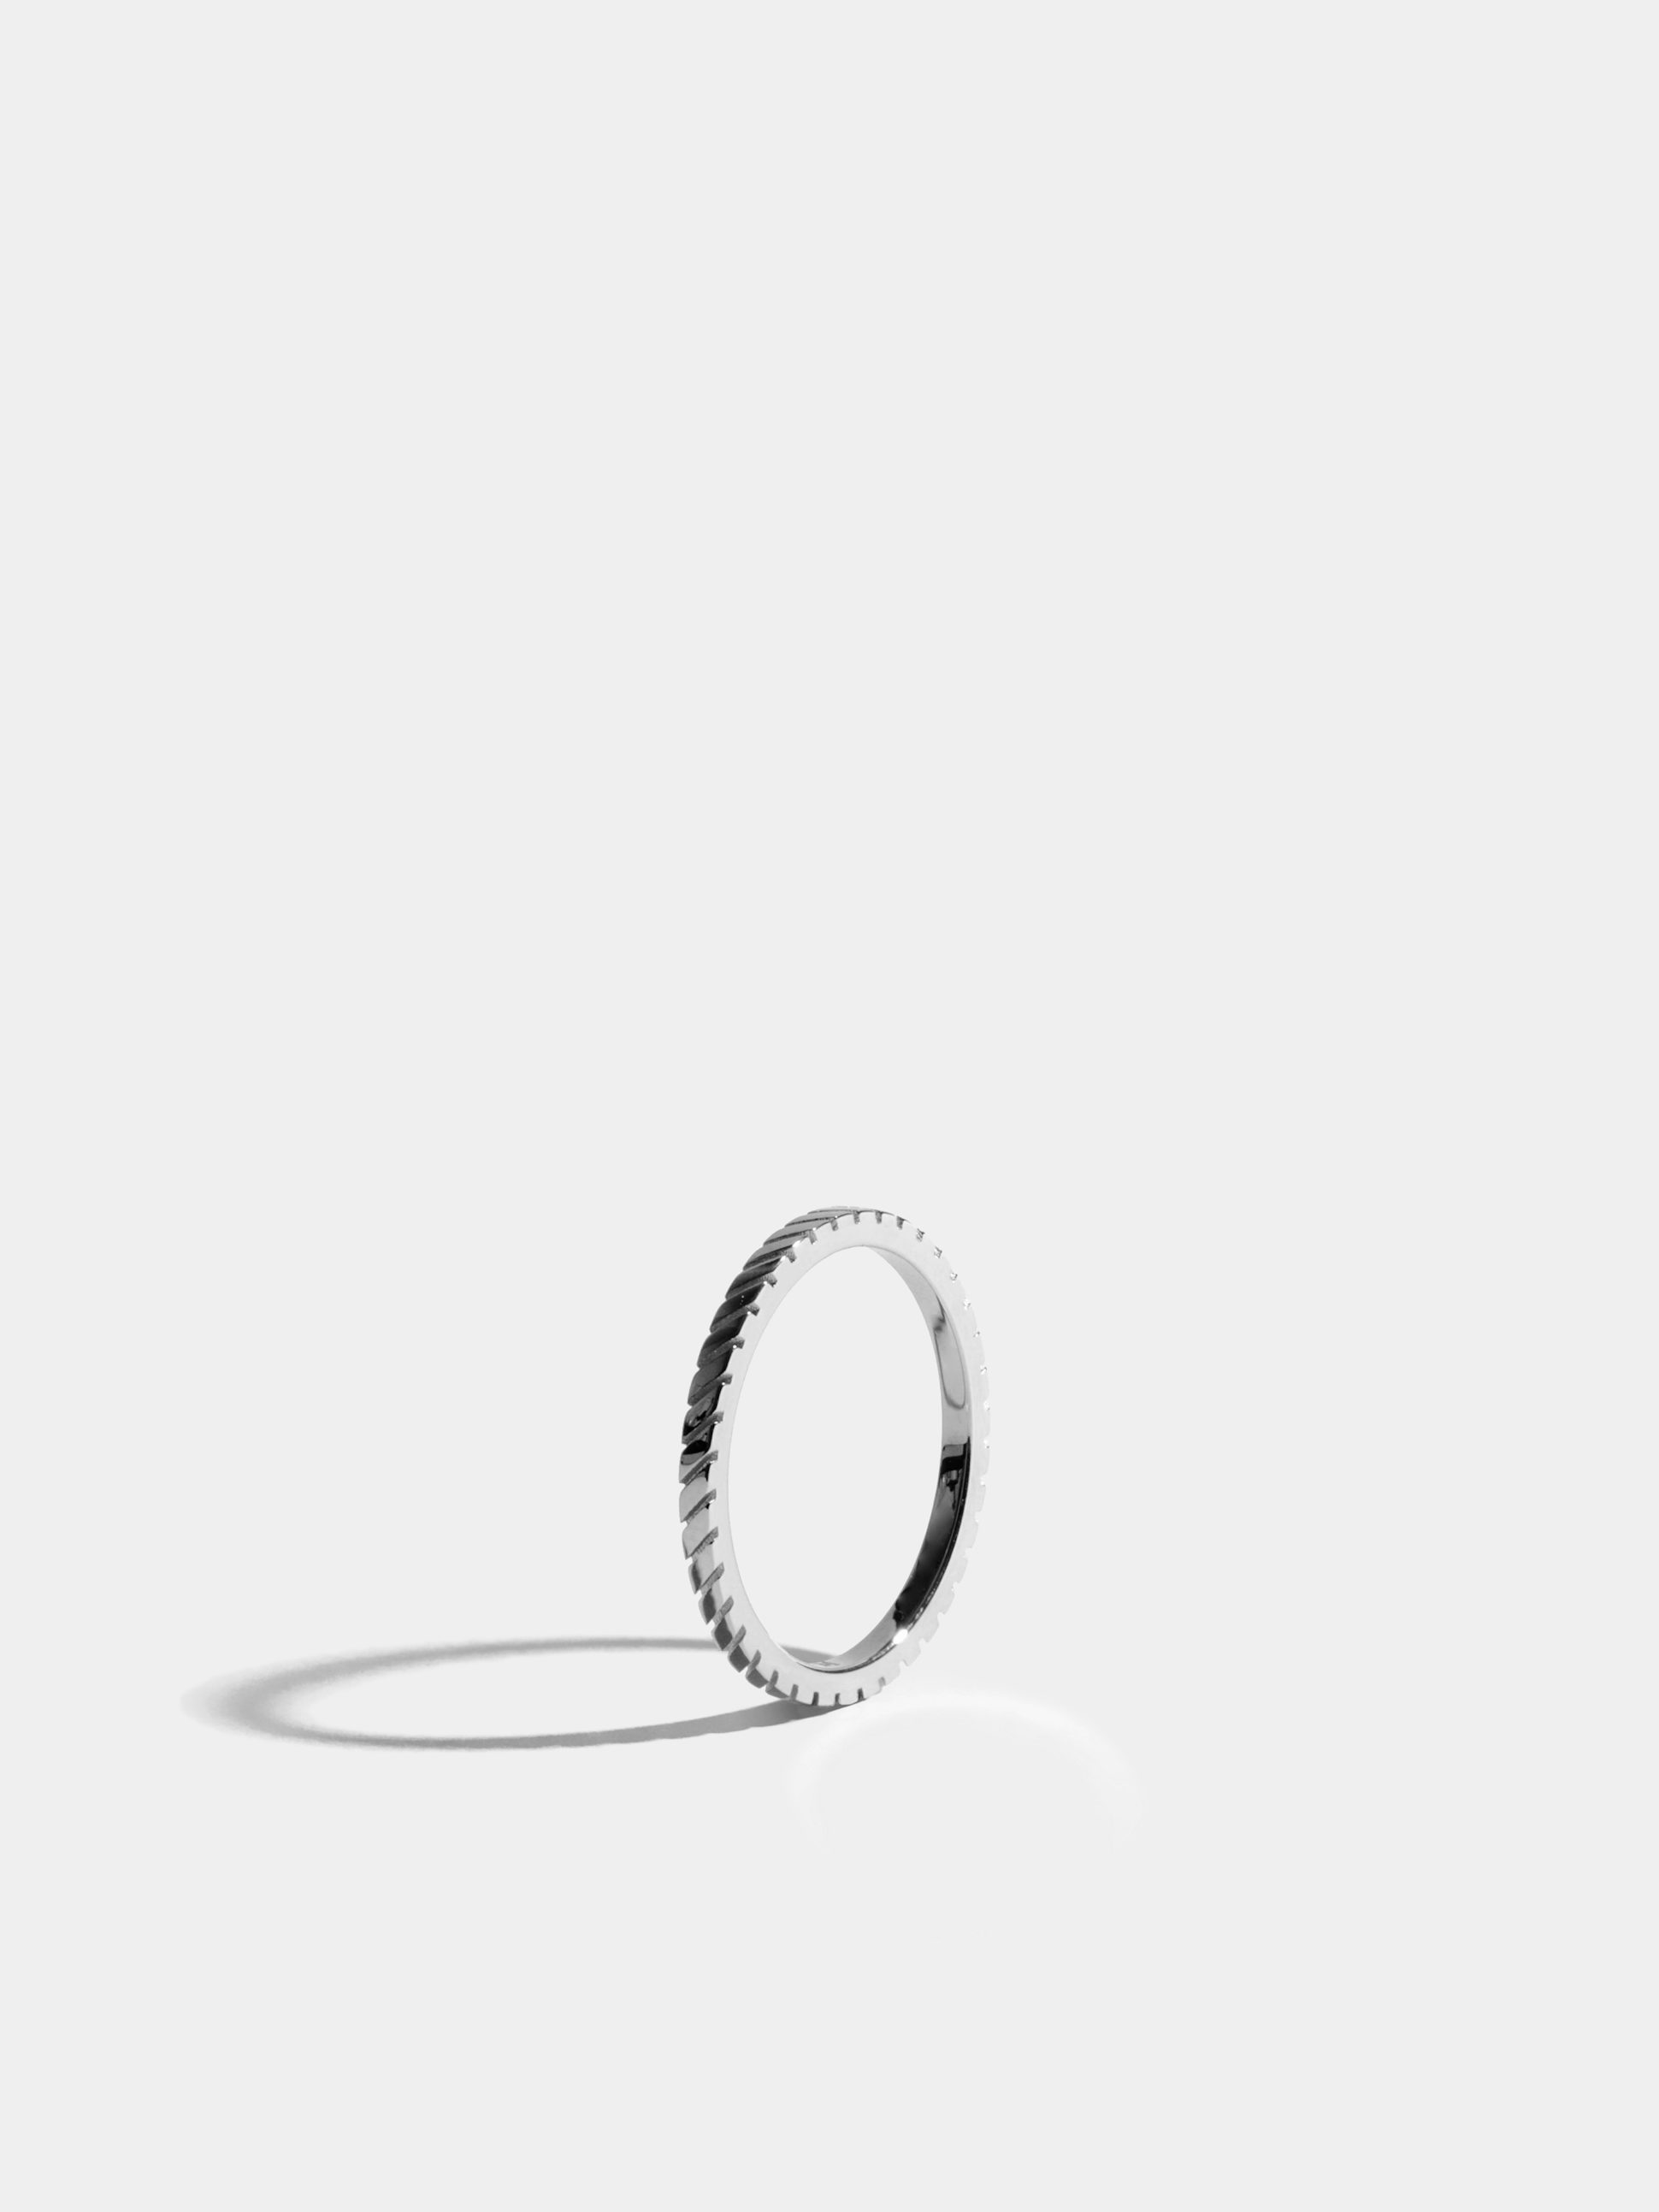 Anagramme grooved ring in 18k Fairmined ethical white gold